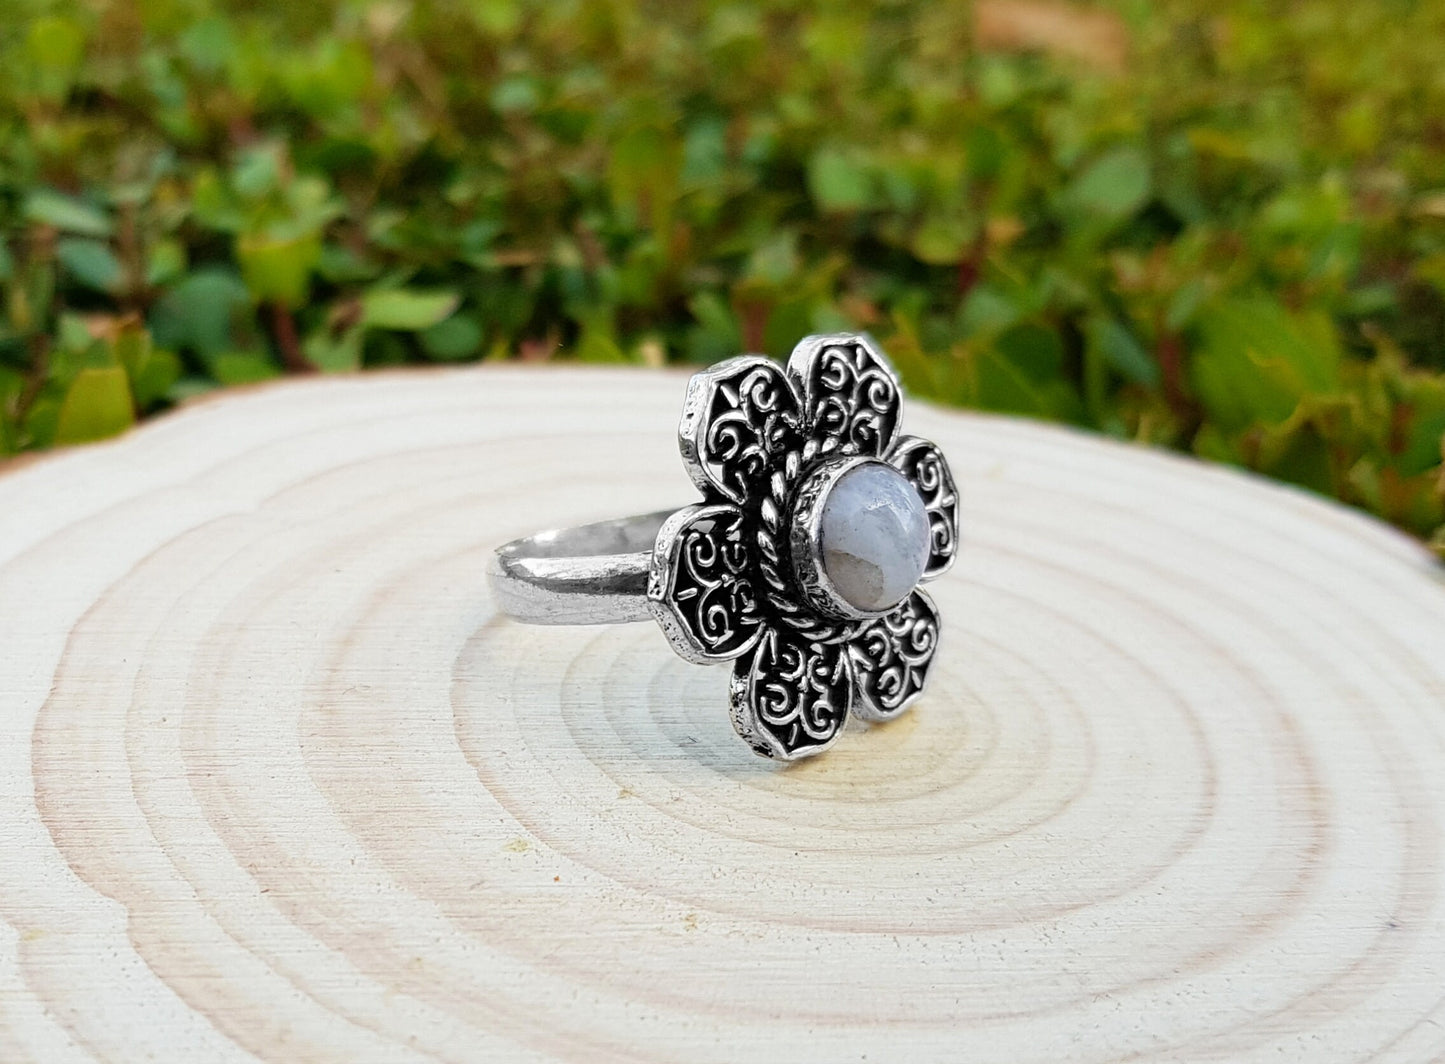 White Moonstone Flower Ring In Sterling Silver Size US 9 Statement Ring Boho Crystal Ring Gift For Women